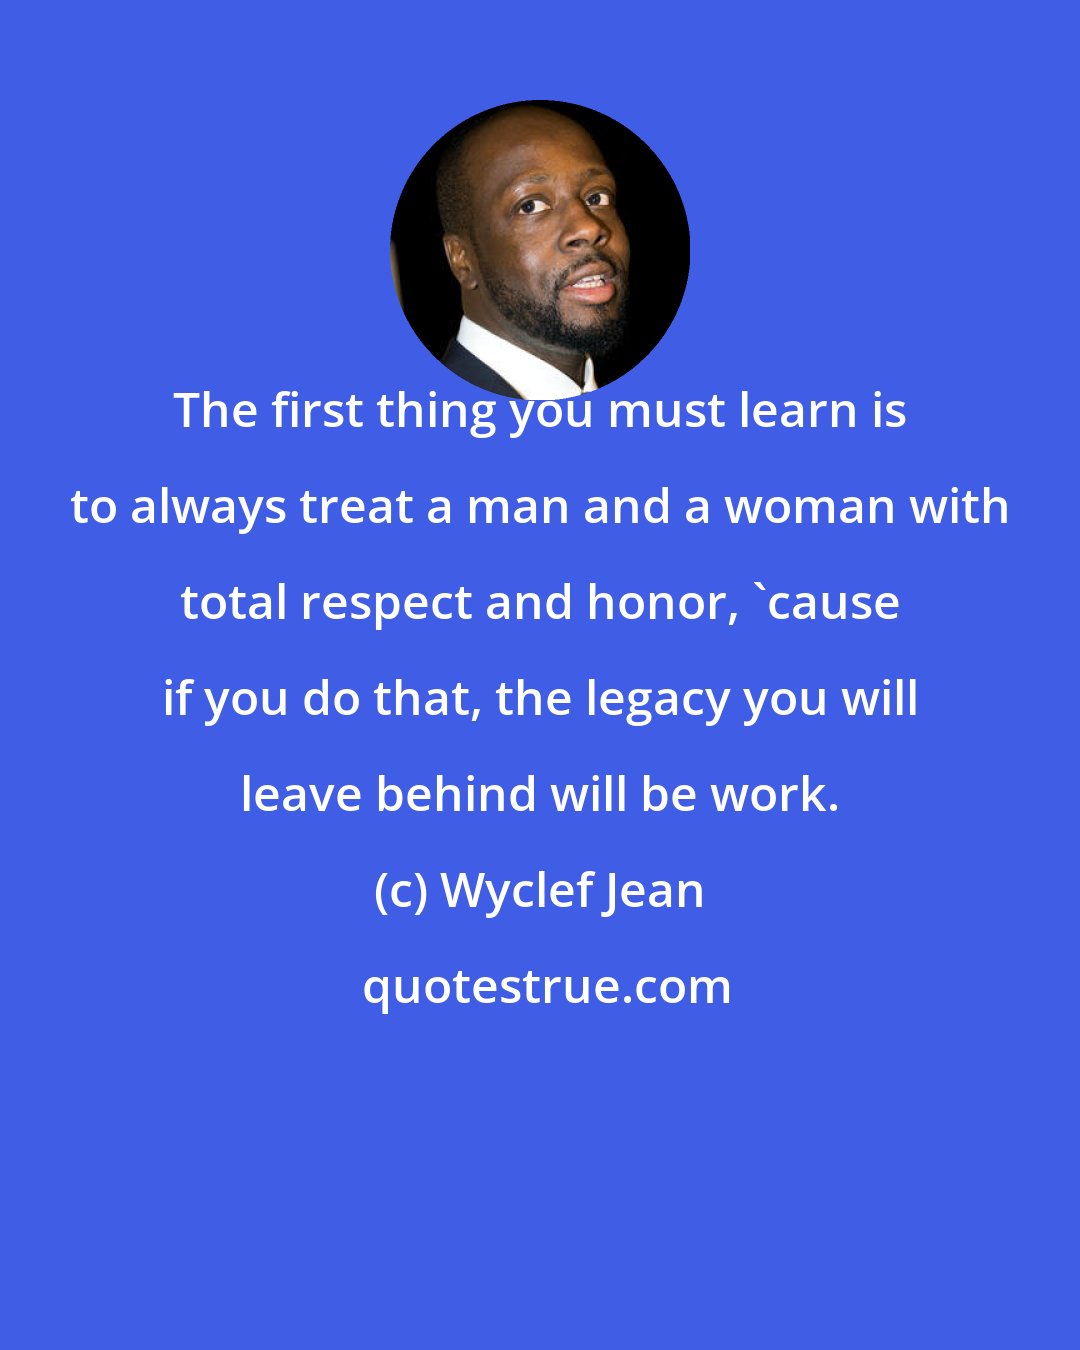 Wyclef Jean: The first thing you must learn is to always treat a man and a woman with total respect and honor, 'cause if you do that, the legacy you will leave behind will be work.